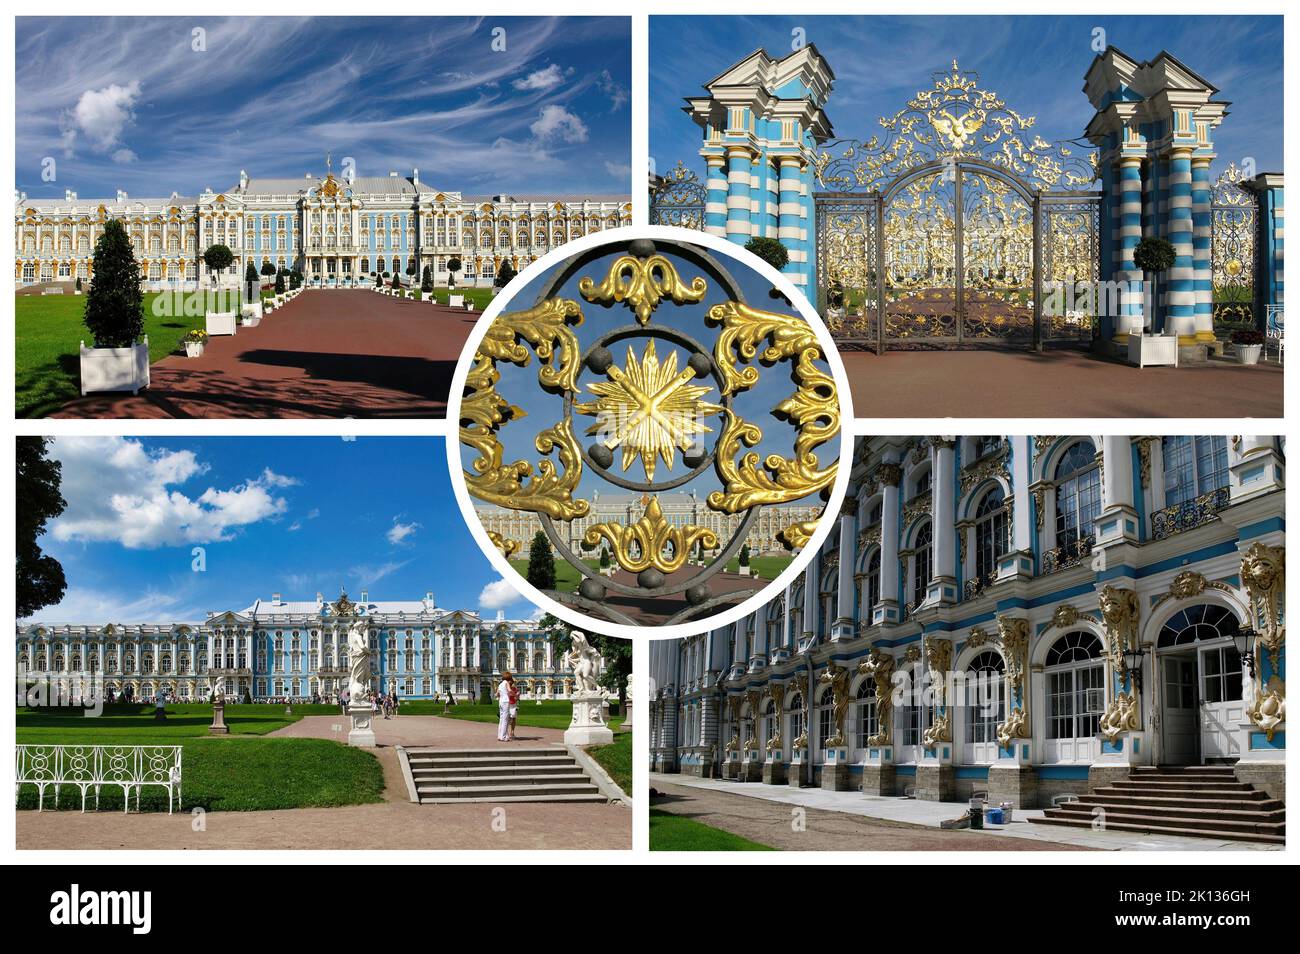 The Beautiful and Luxurious Catherine Palace, located in the city of Tsarskoye Selo (Pushkin), St. Petersburg, Russia Stock Photo